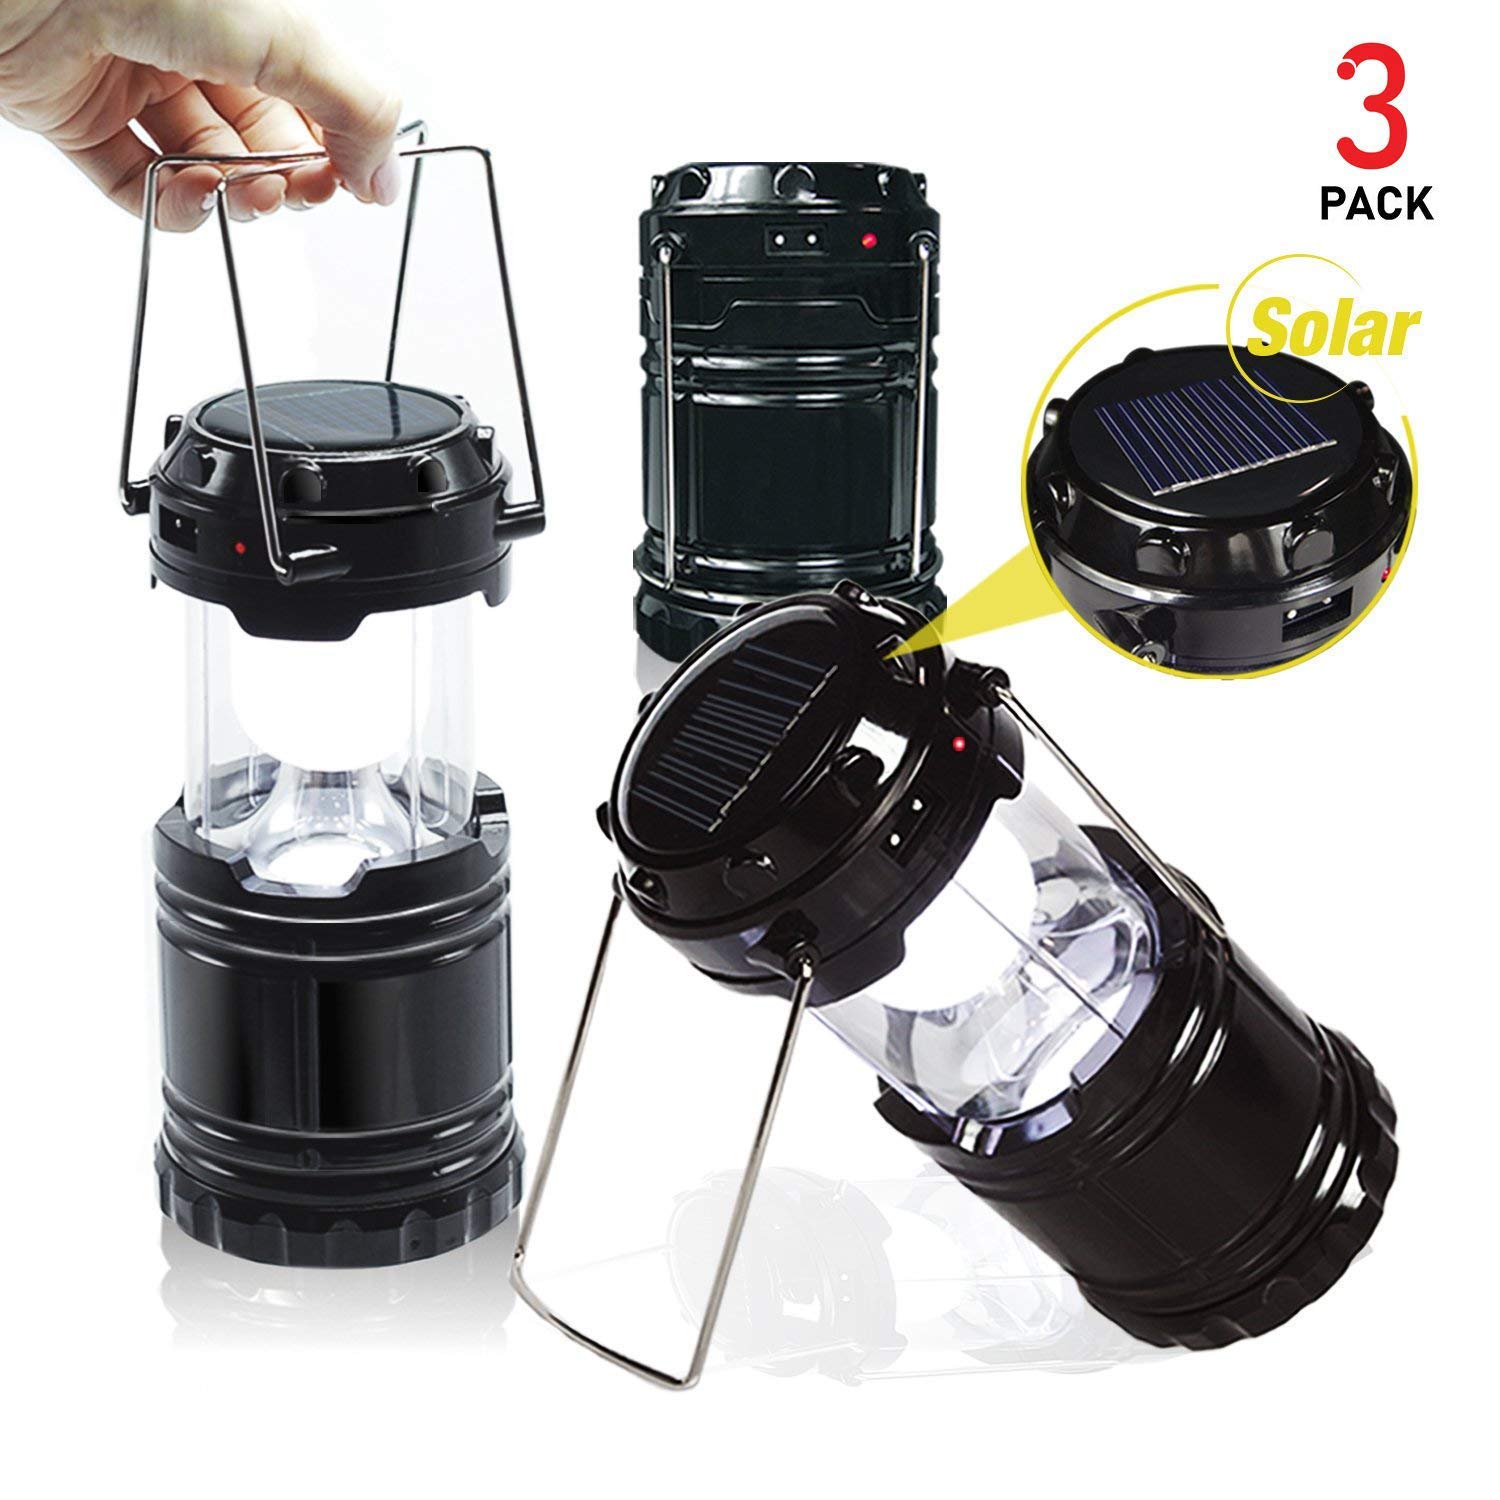 EACHPOLE Outdoor Camping LED Lantern